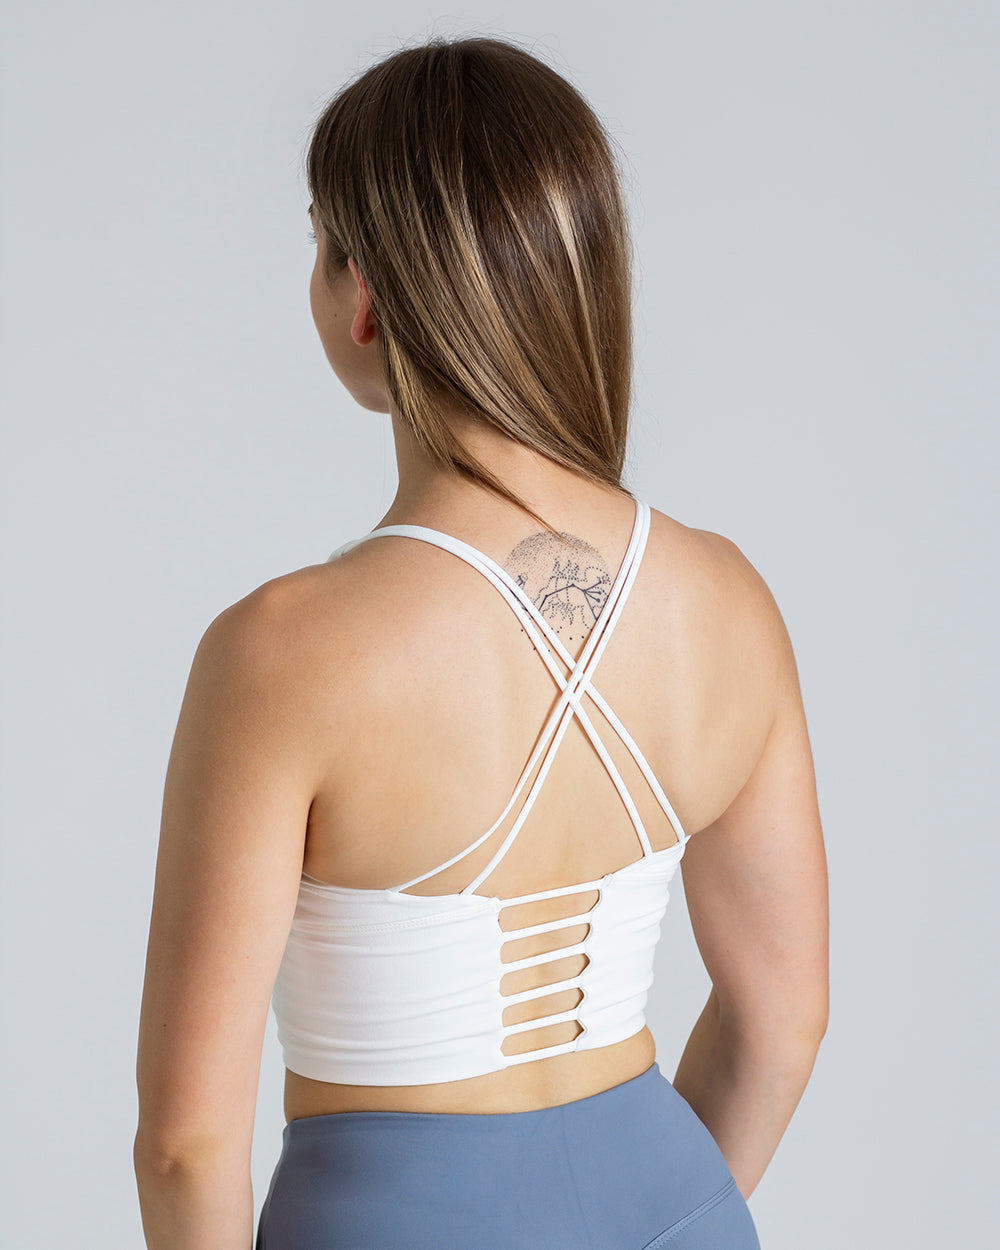 Strappy Back Sports Bras for Women Padded Workout Tops Medium Support Crop  Tops for Women, White, X-Small price in Saudi Arabia,  Saudi Arabia